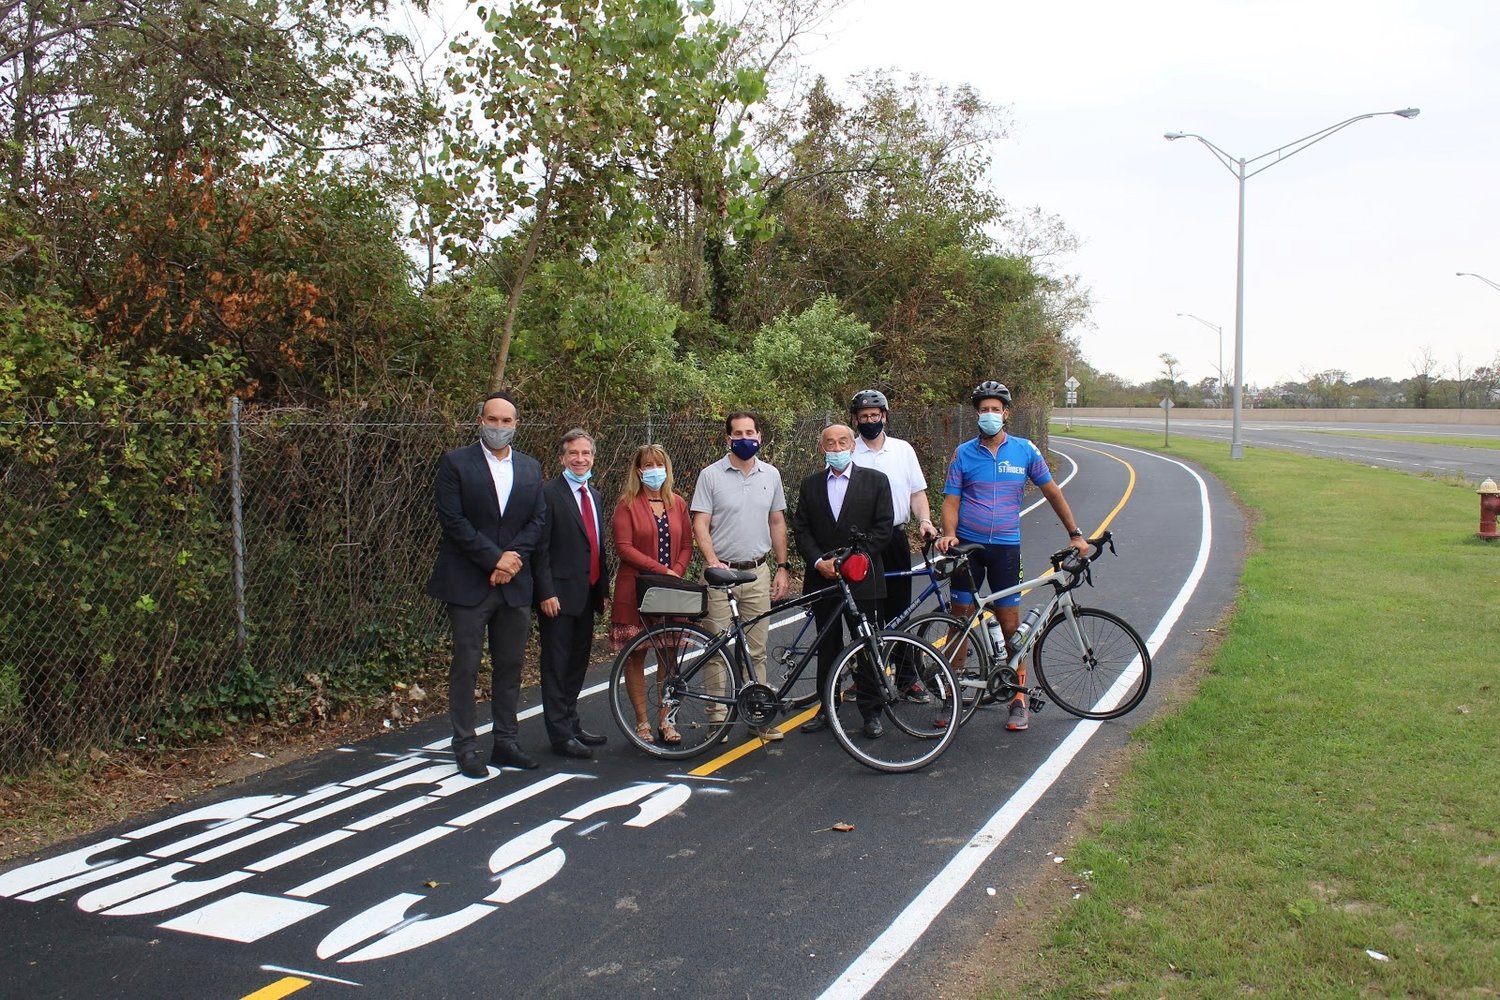 The Nassau Expressway bike path approaching the Seagirt Boulevard exit heading southbound has been repaired. From left, Deputy Mayor of Lawrence, Michael Fragin, Lawrence Trustee Uri Kaufman, Assemblywoman Missy Miller, State Sen. Todd Kaminsky, Lawrence Mayor Alex Edelman, Lawrence residents/cyclists Yosef Nussbaum and Mark Rubin.